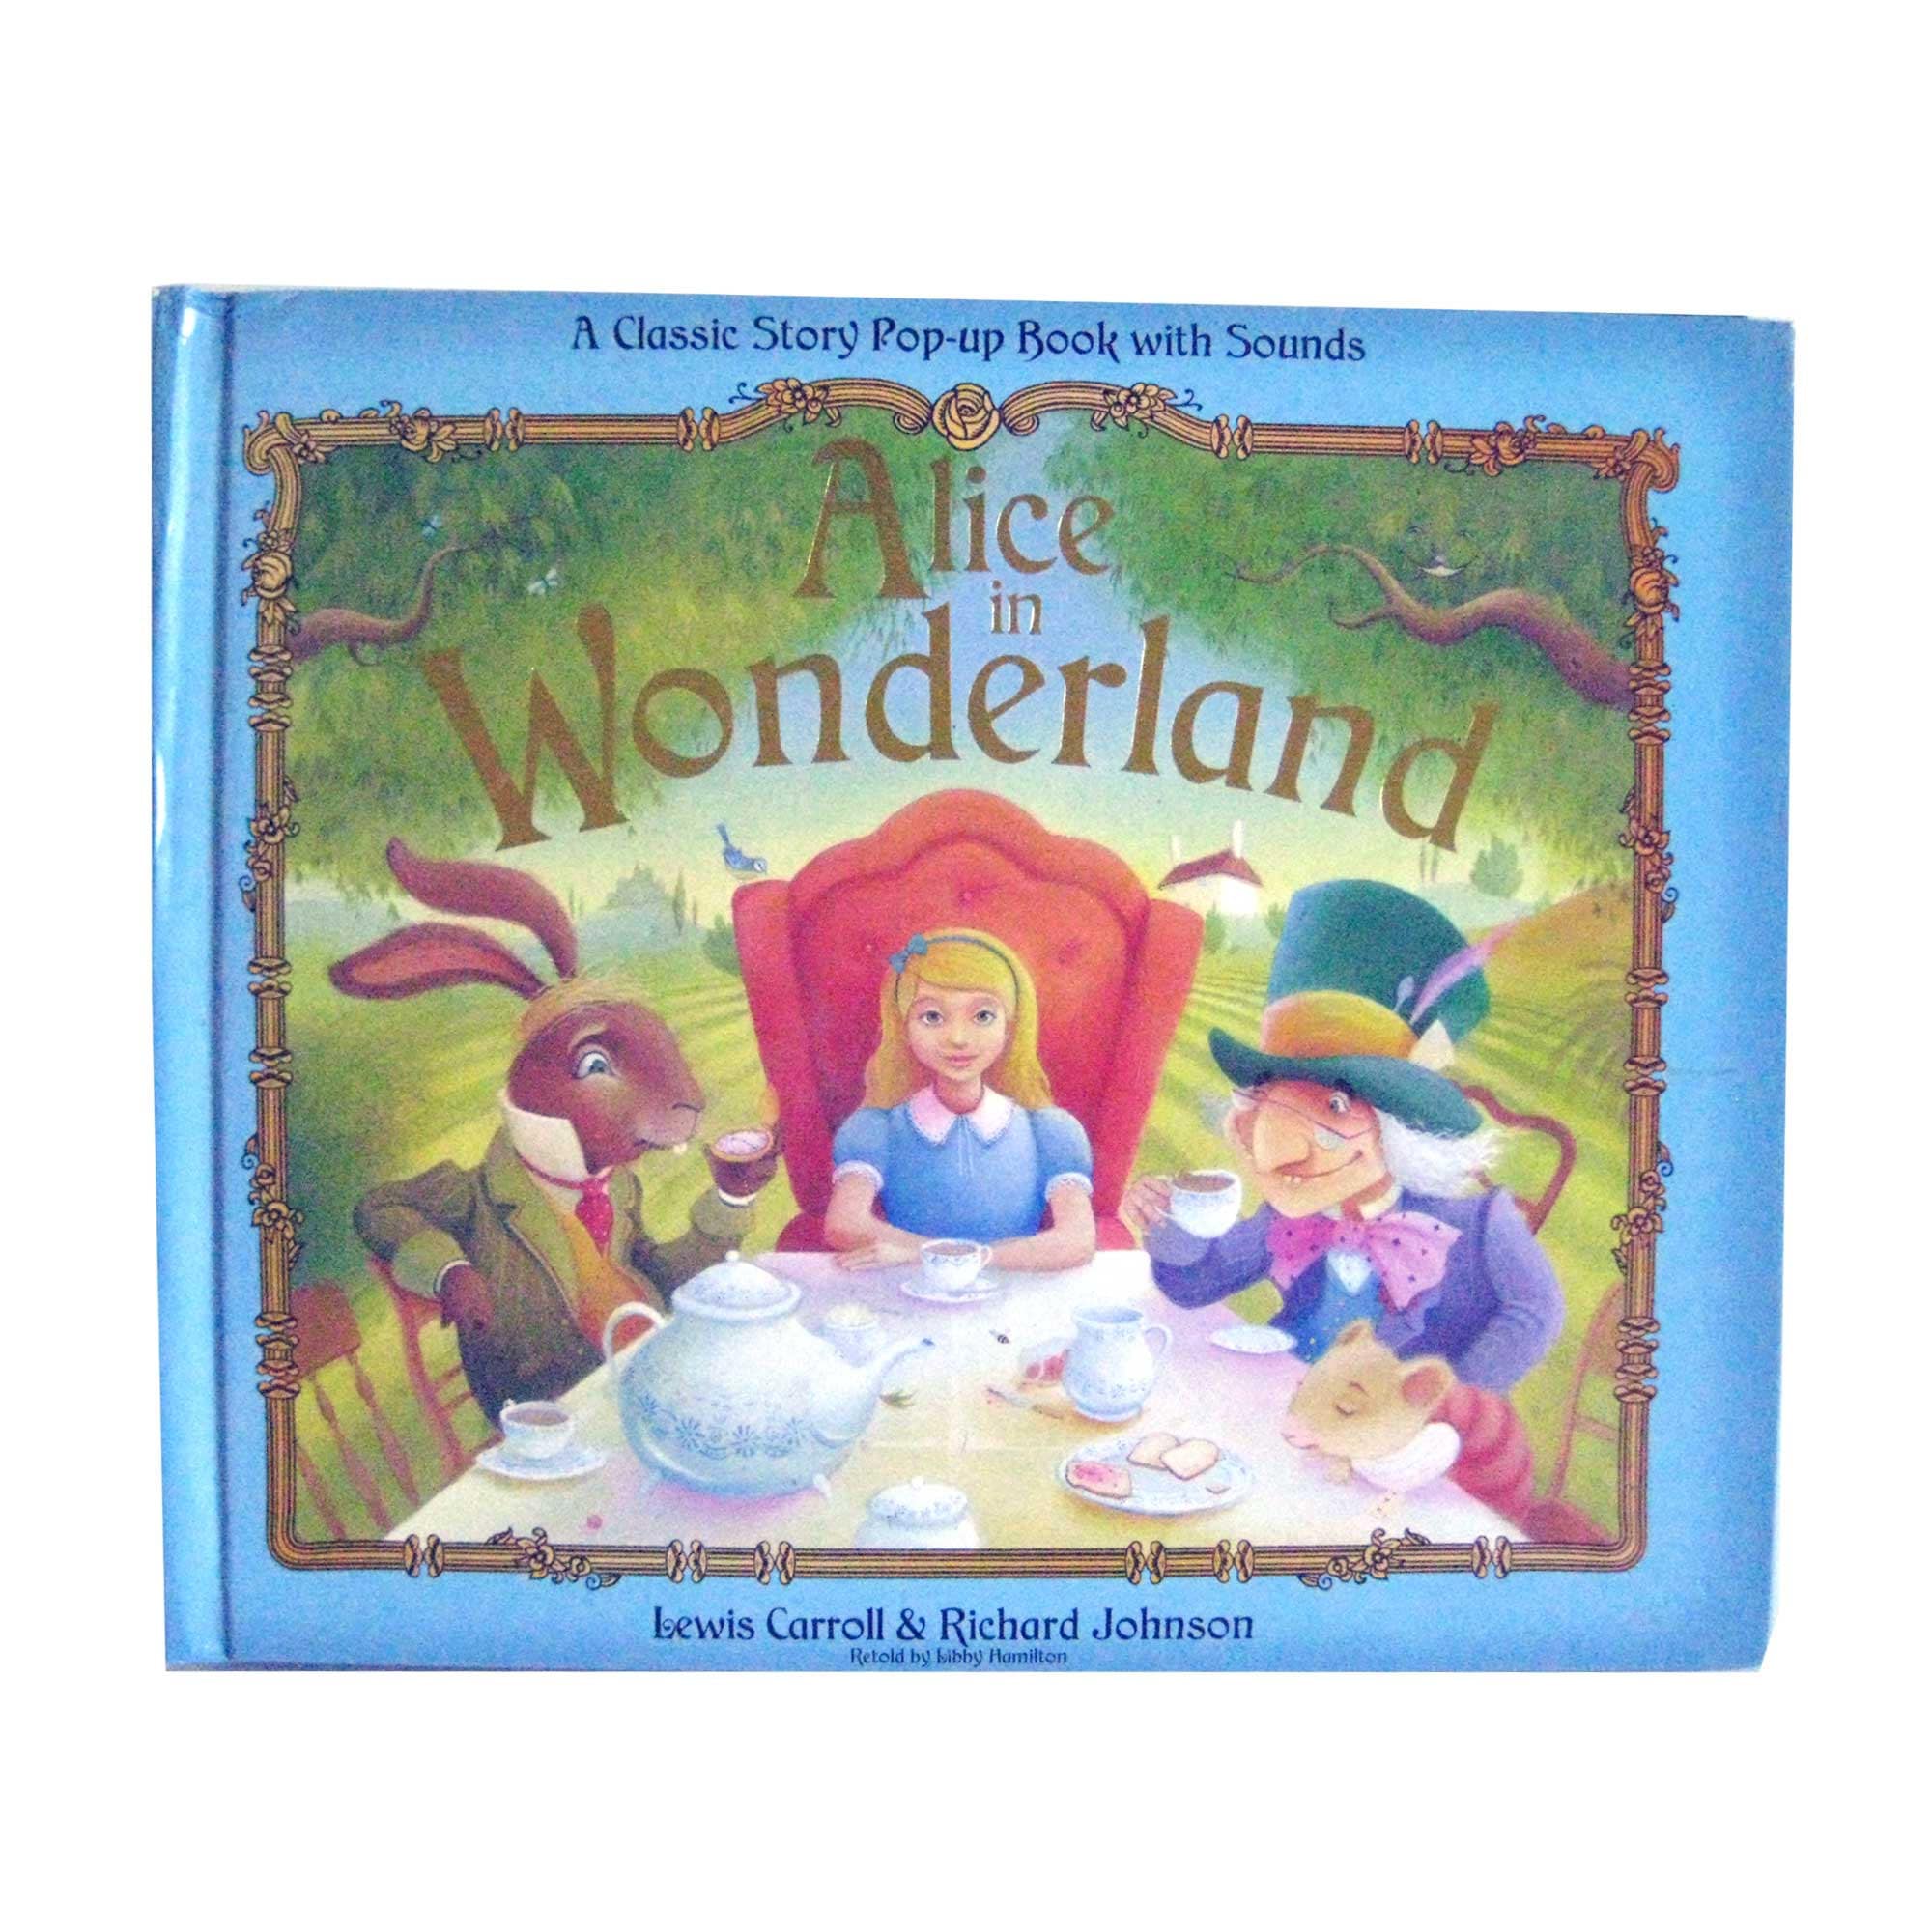 Alice in Wonderland Pop-up Book A Classic Story Pop-up Book